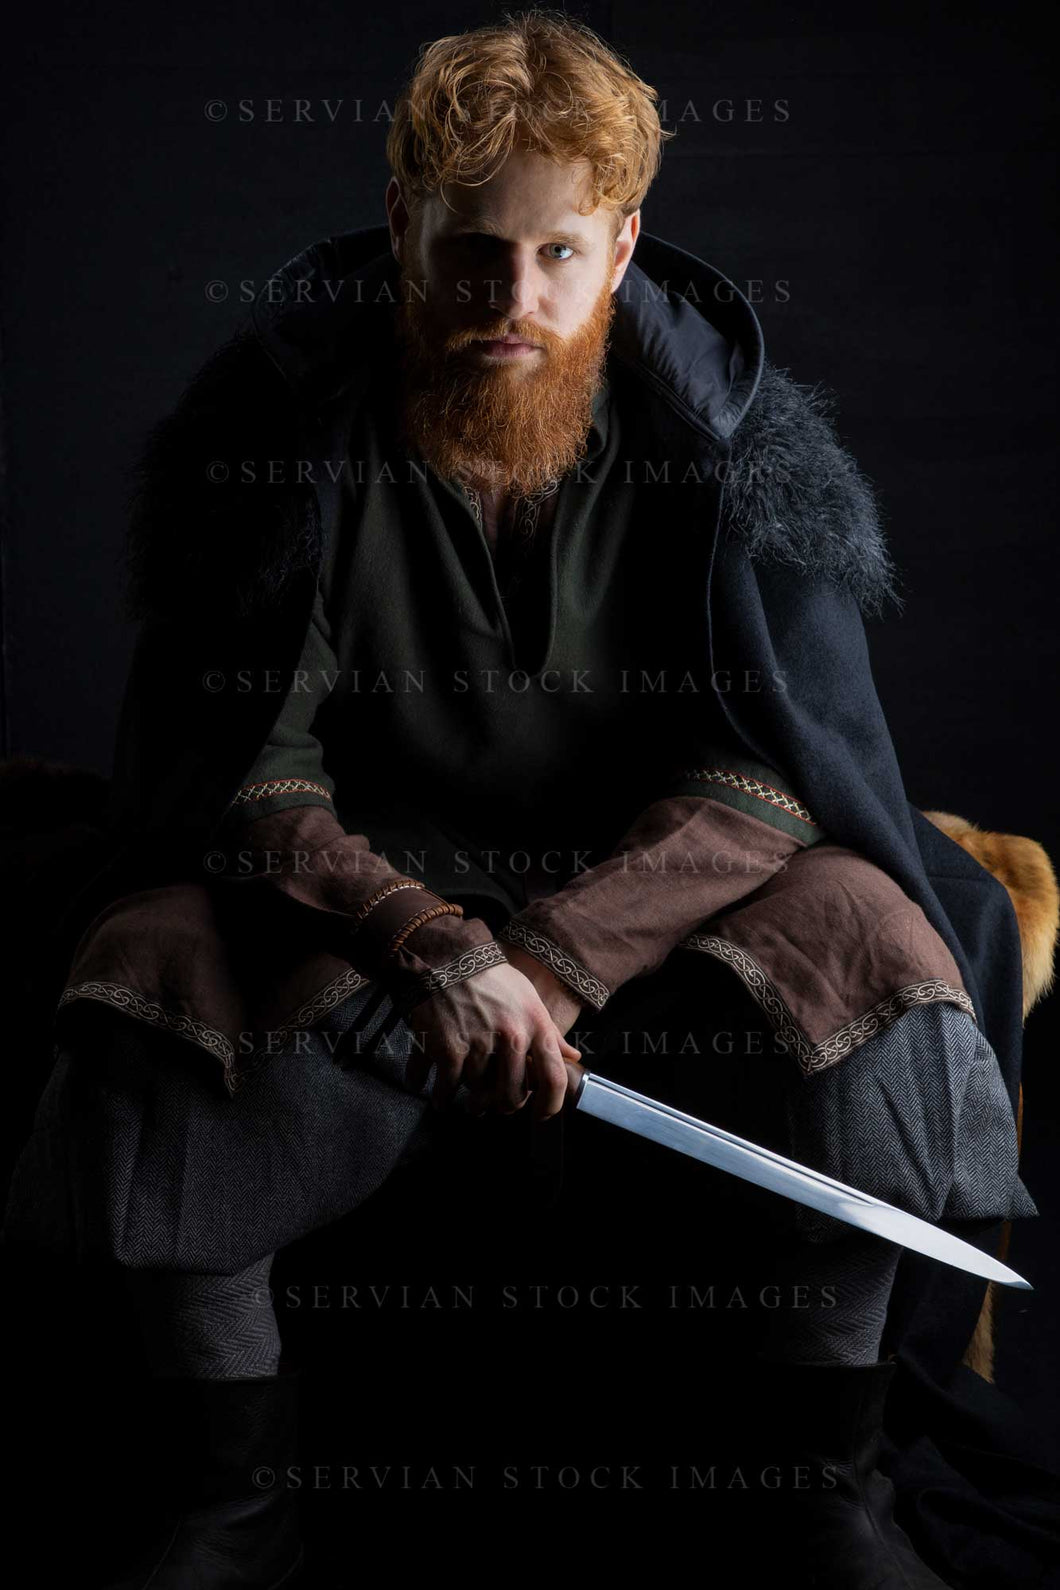 Viking or high fantasy man with red hair and beard wearing a black cloak against a black backdrop (Luke 3206)